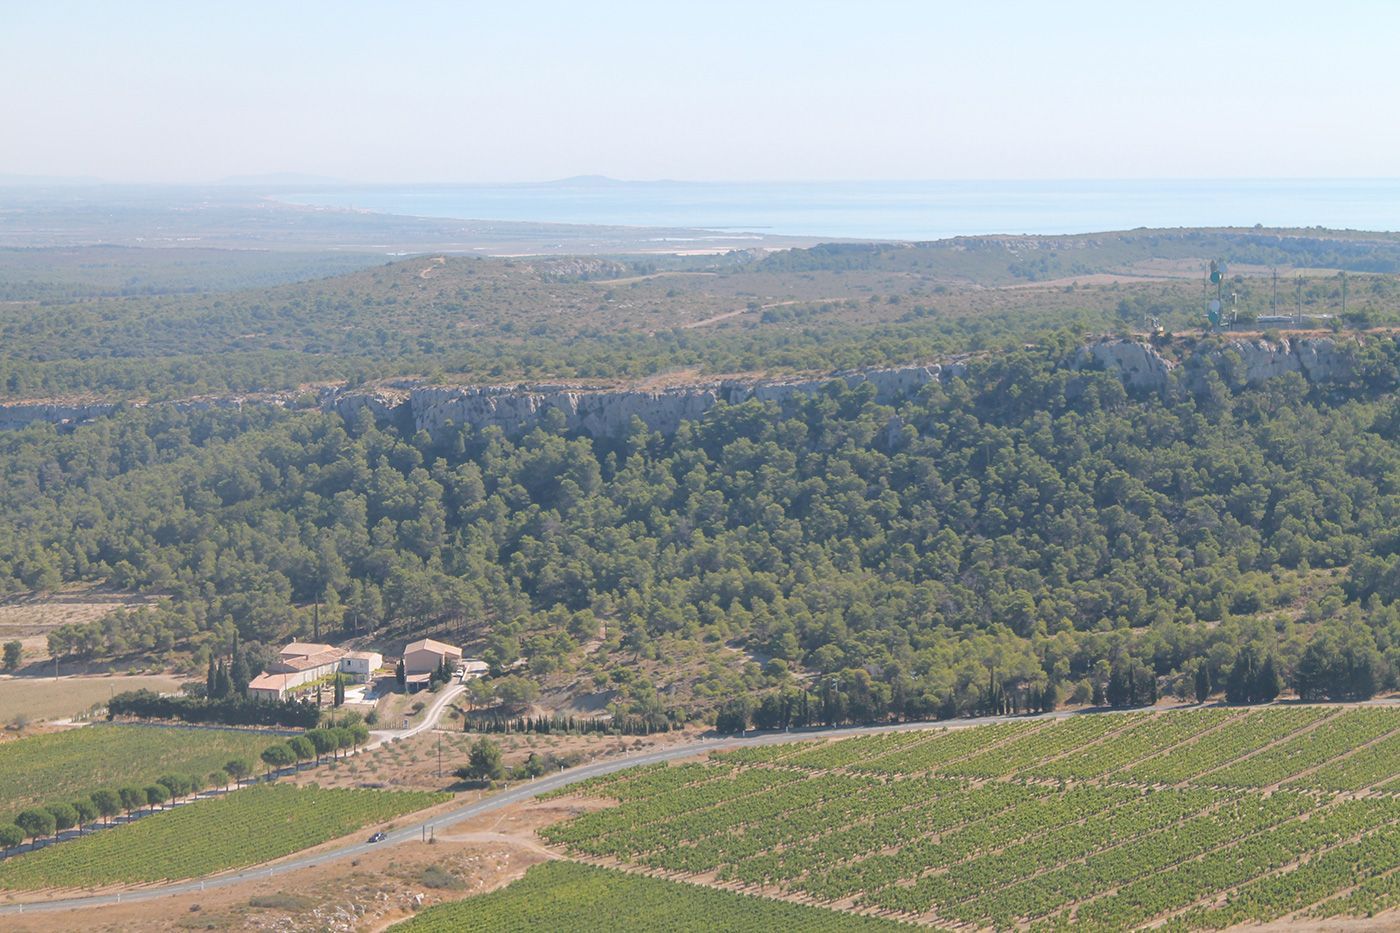 View across the wine estate and the vines